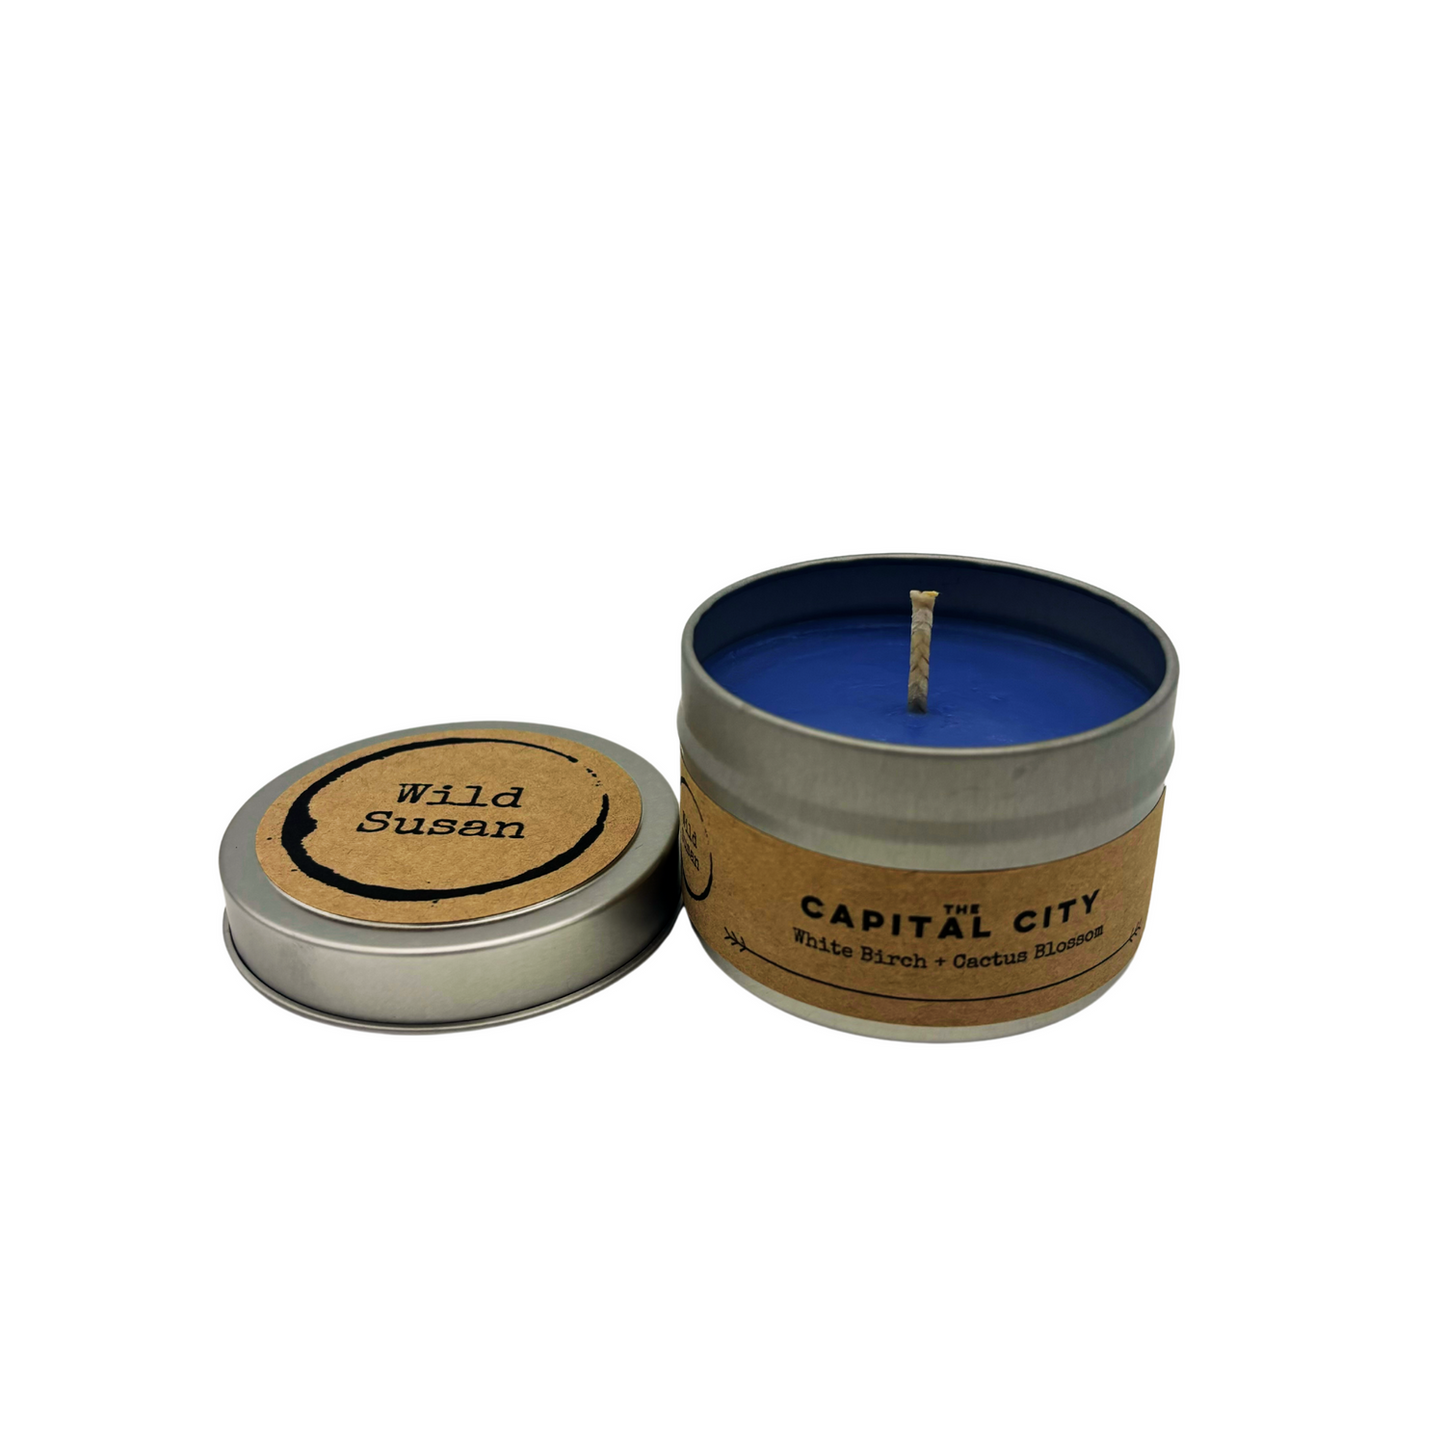 Capital City [White Birch + Cactus Blossom] Soy Candle/Wax Melt